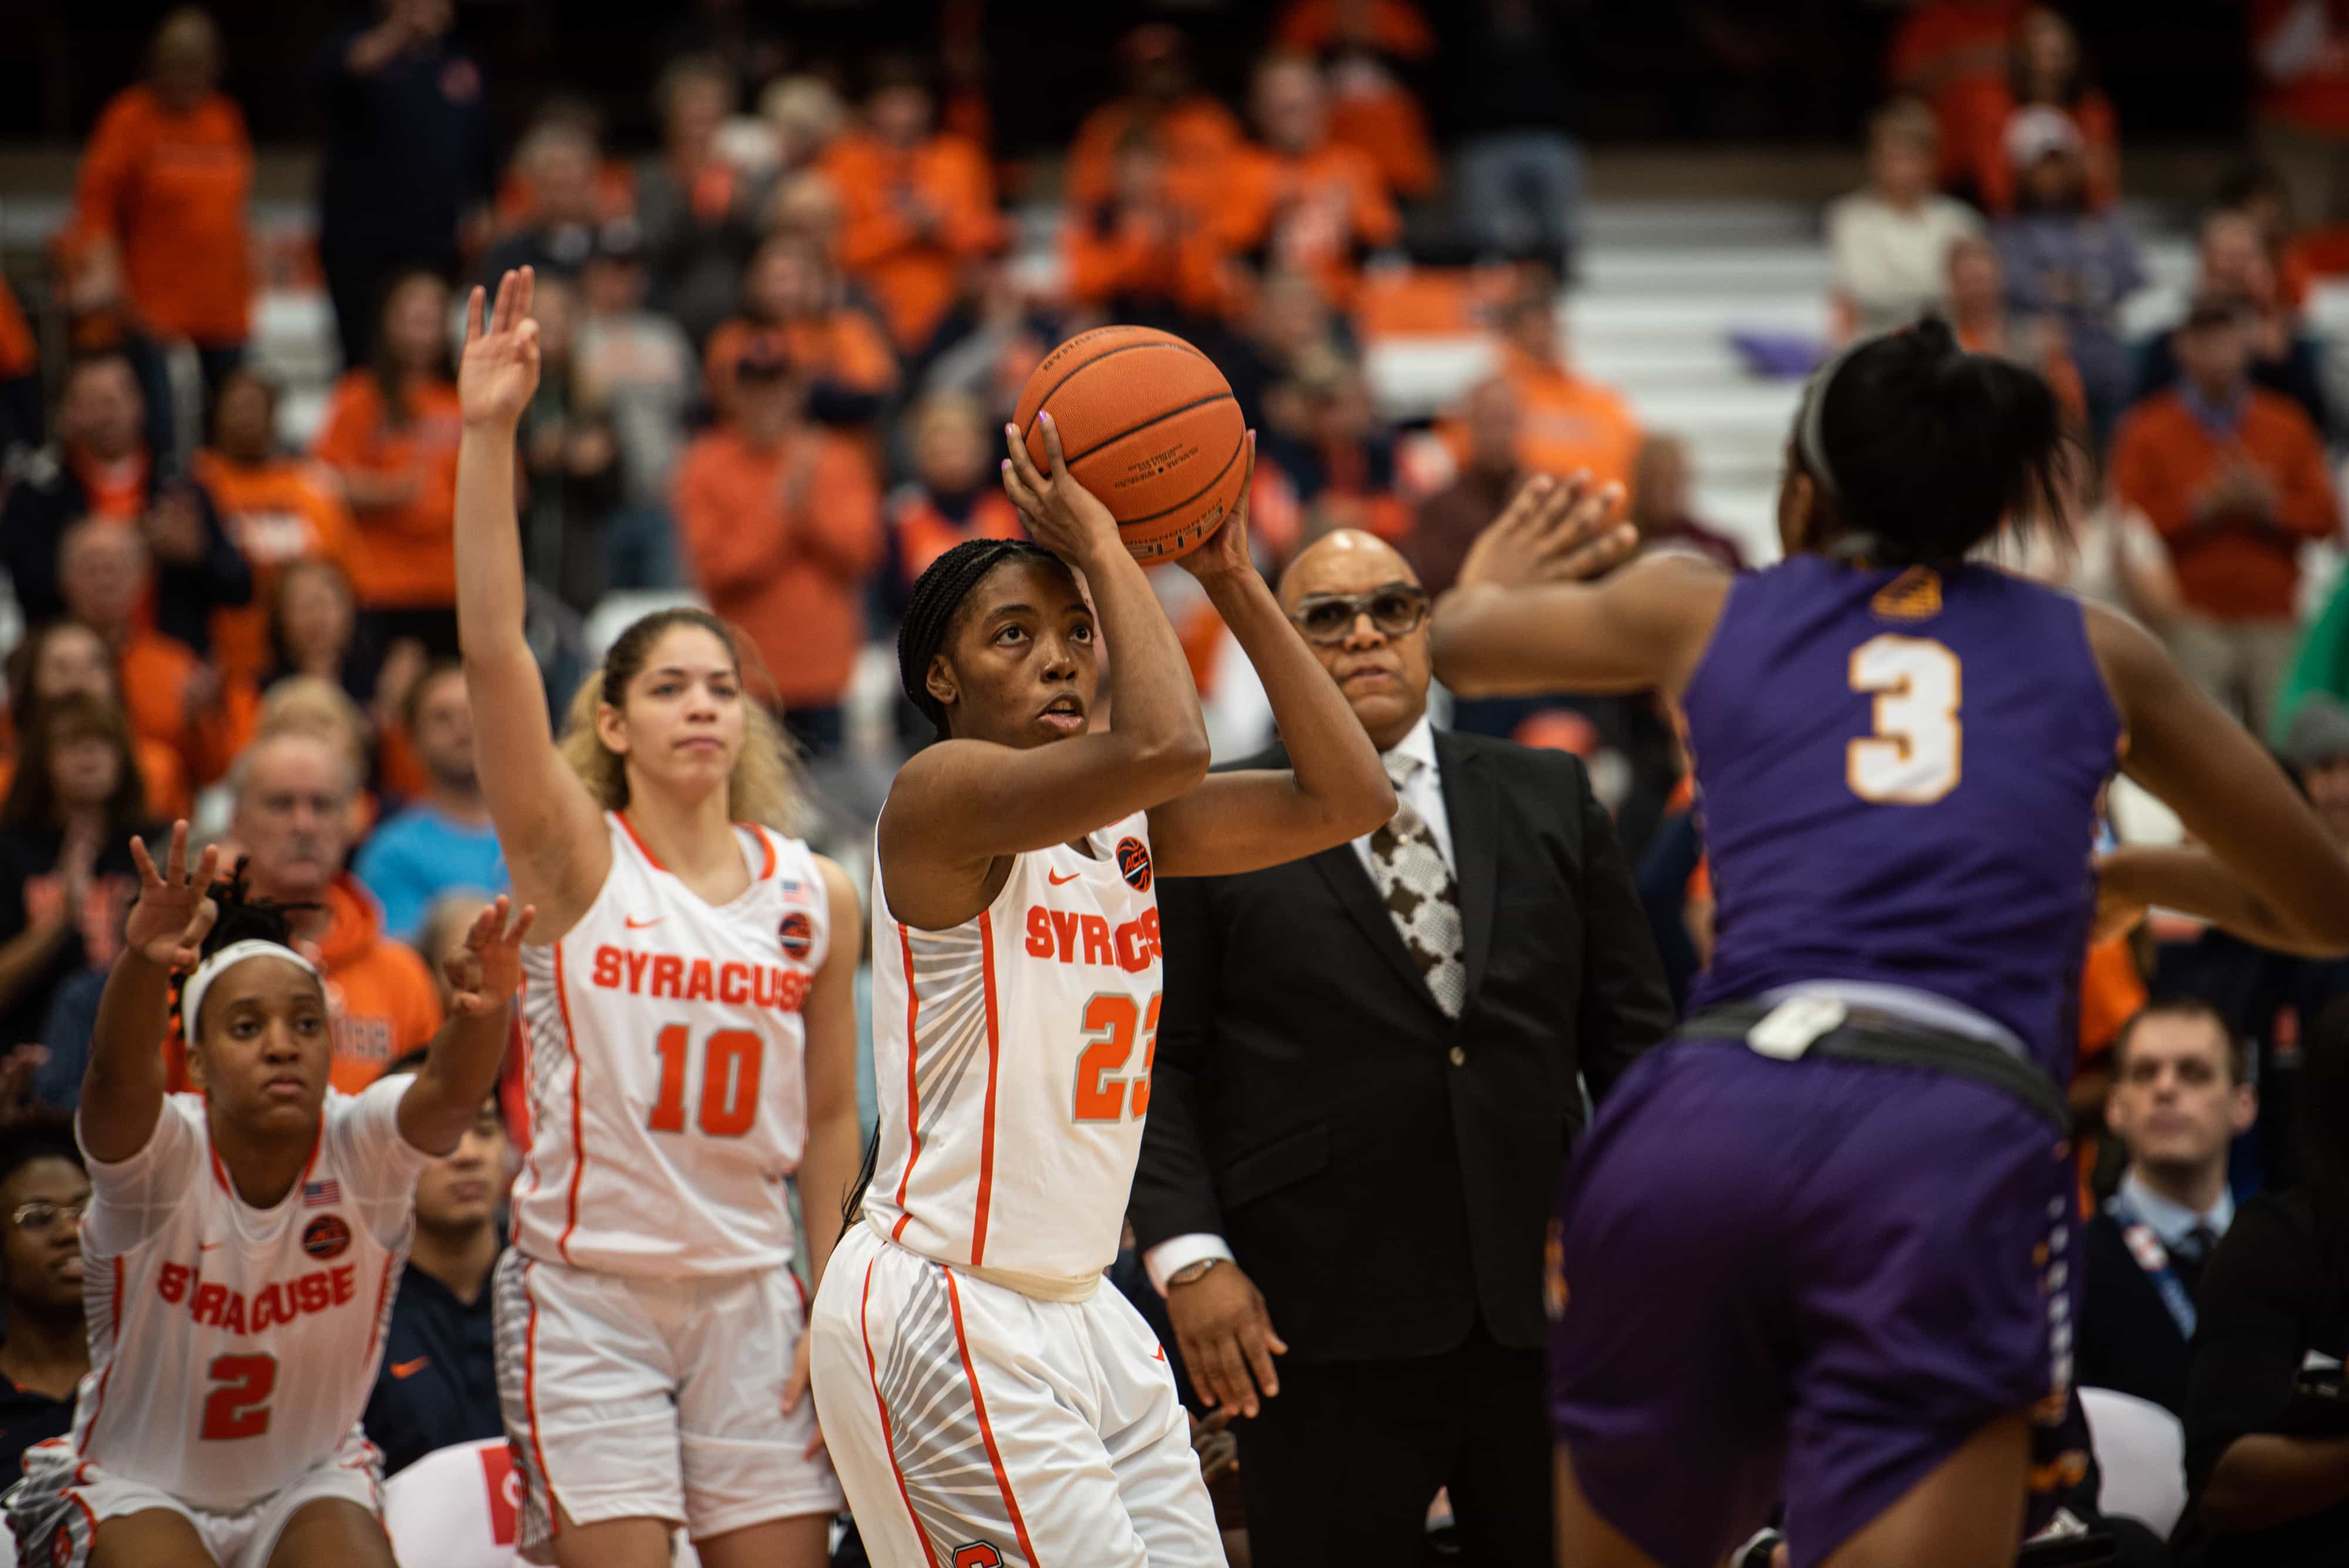 Syracuse guard Kiara Lewis prepares to take a shot. Lewis scored 17 points in their victory 75-53 against Albany.